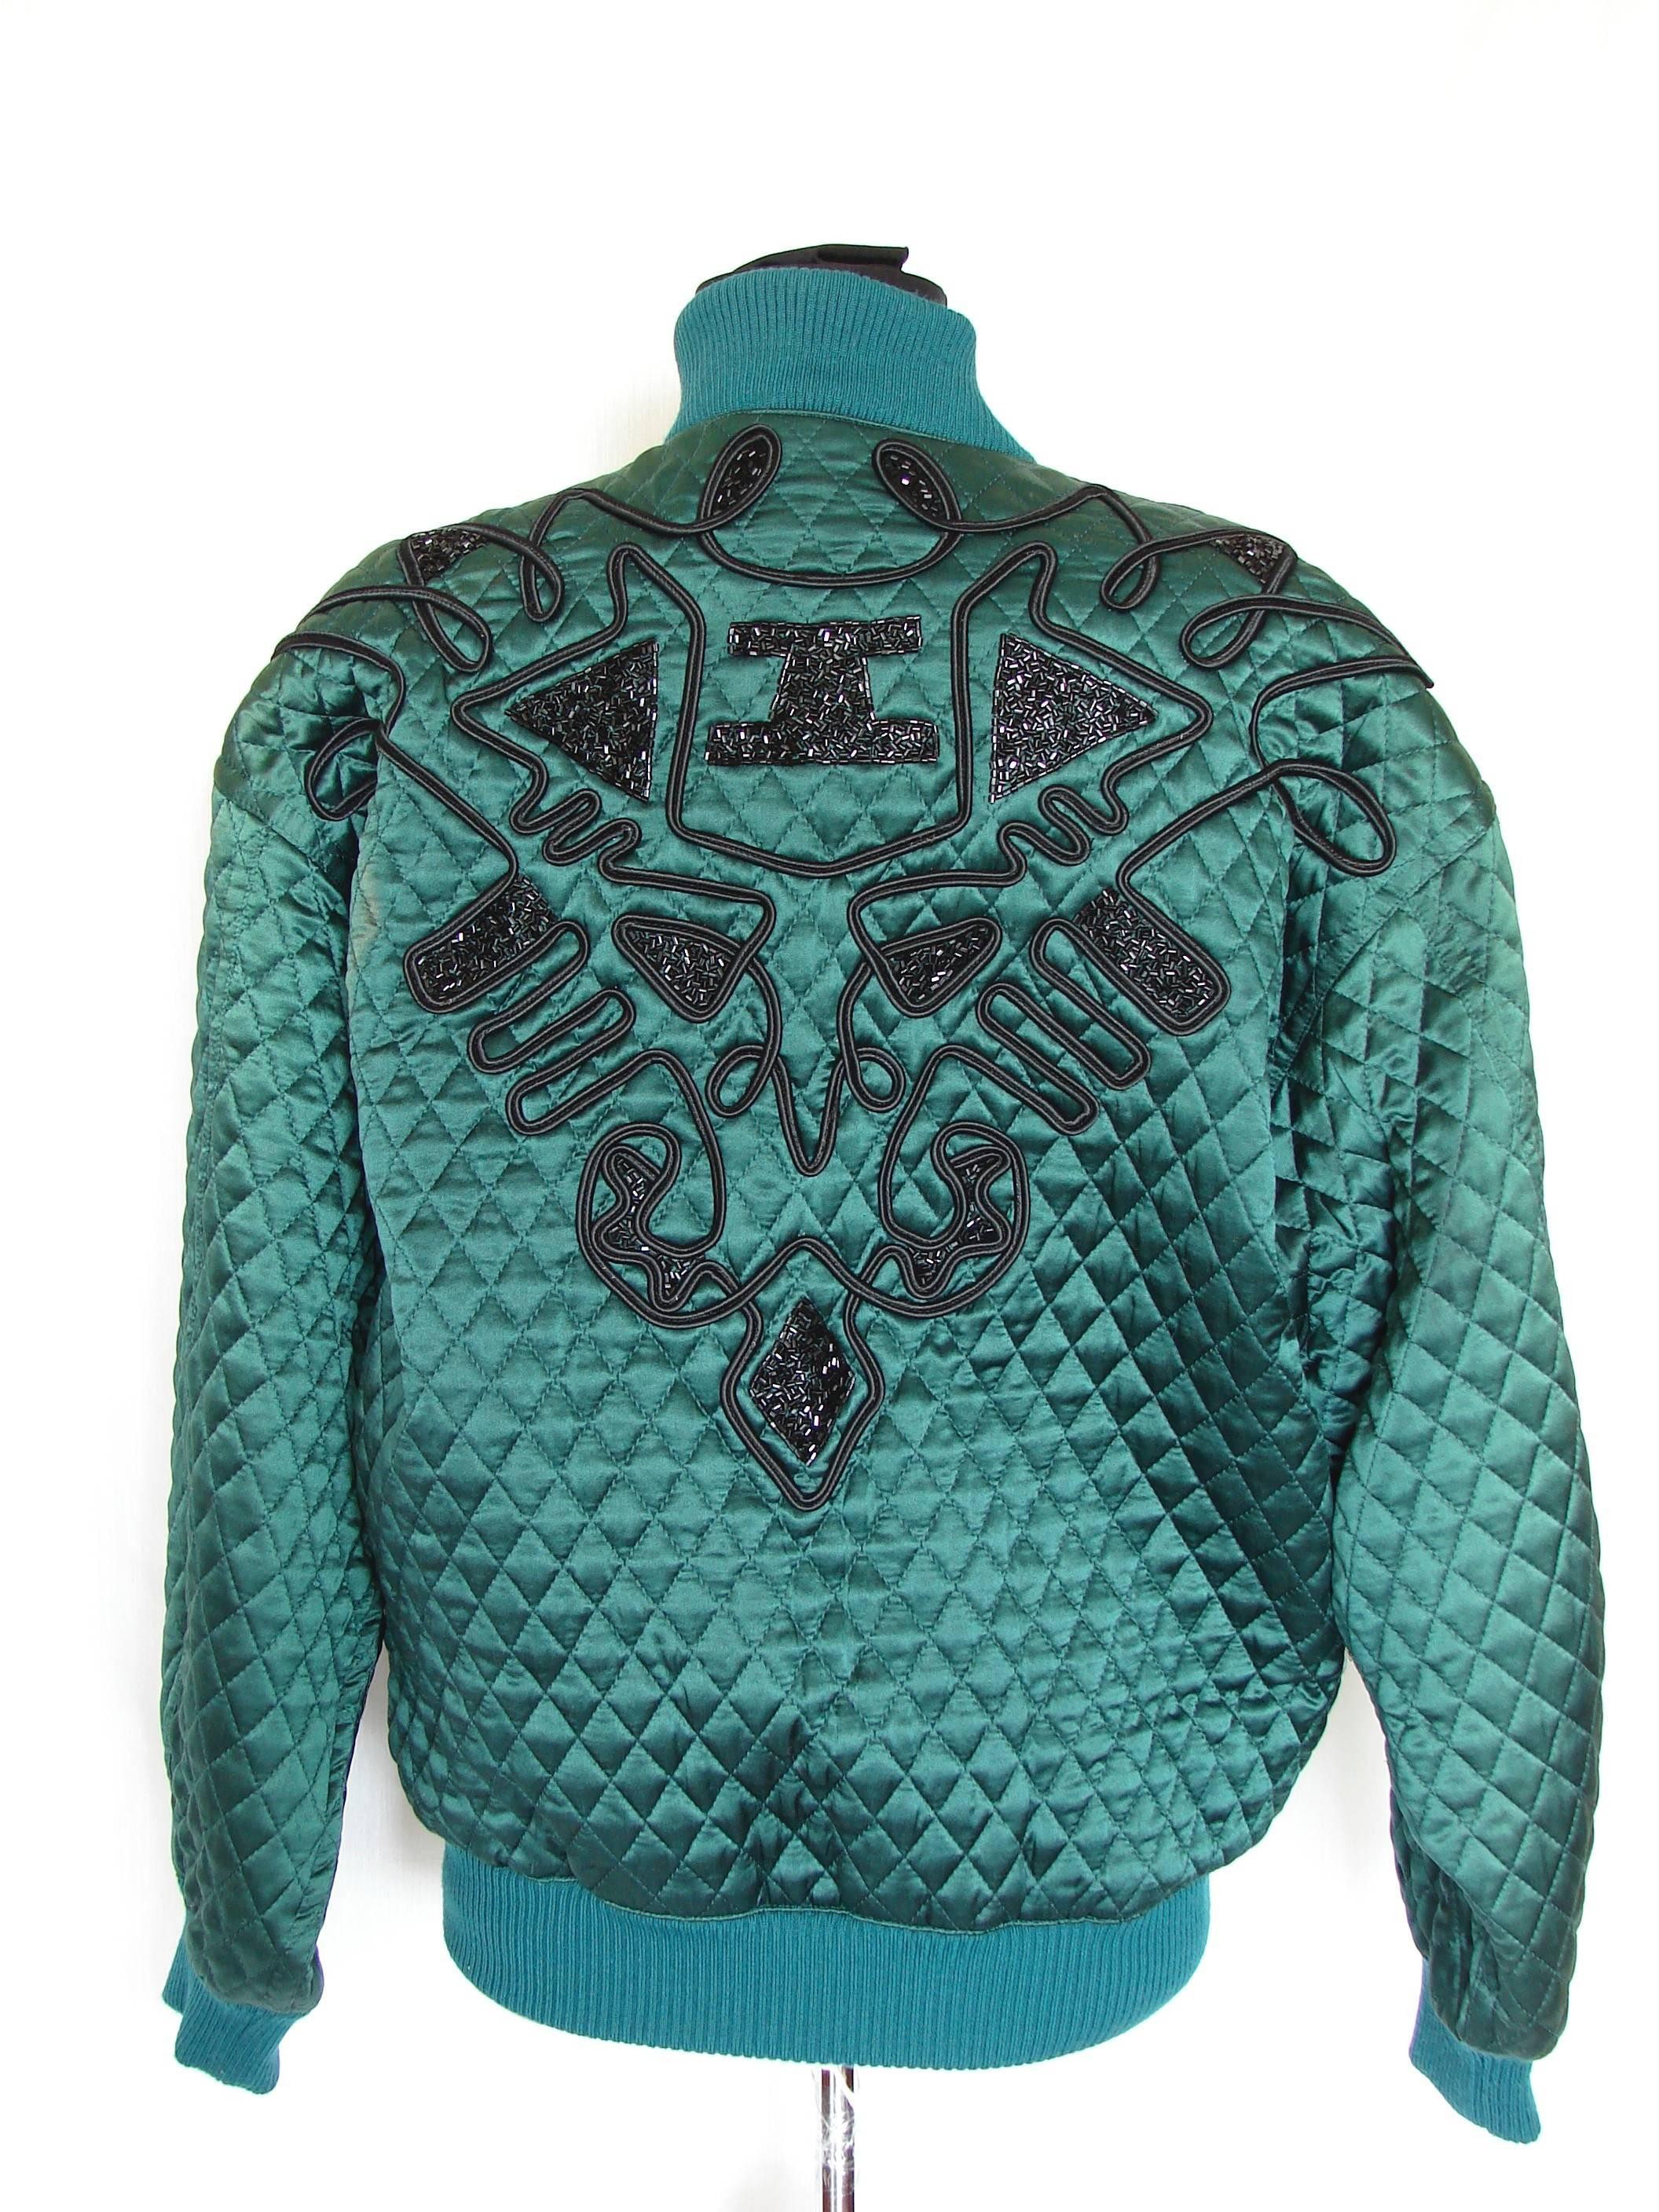 Kansai Yamamoto O2 Green Quilted Silk Jacket with Black Jet Bead Designs 1980s M 2